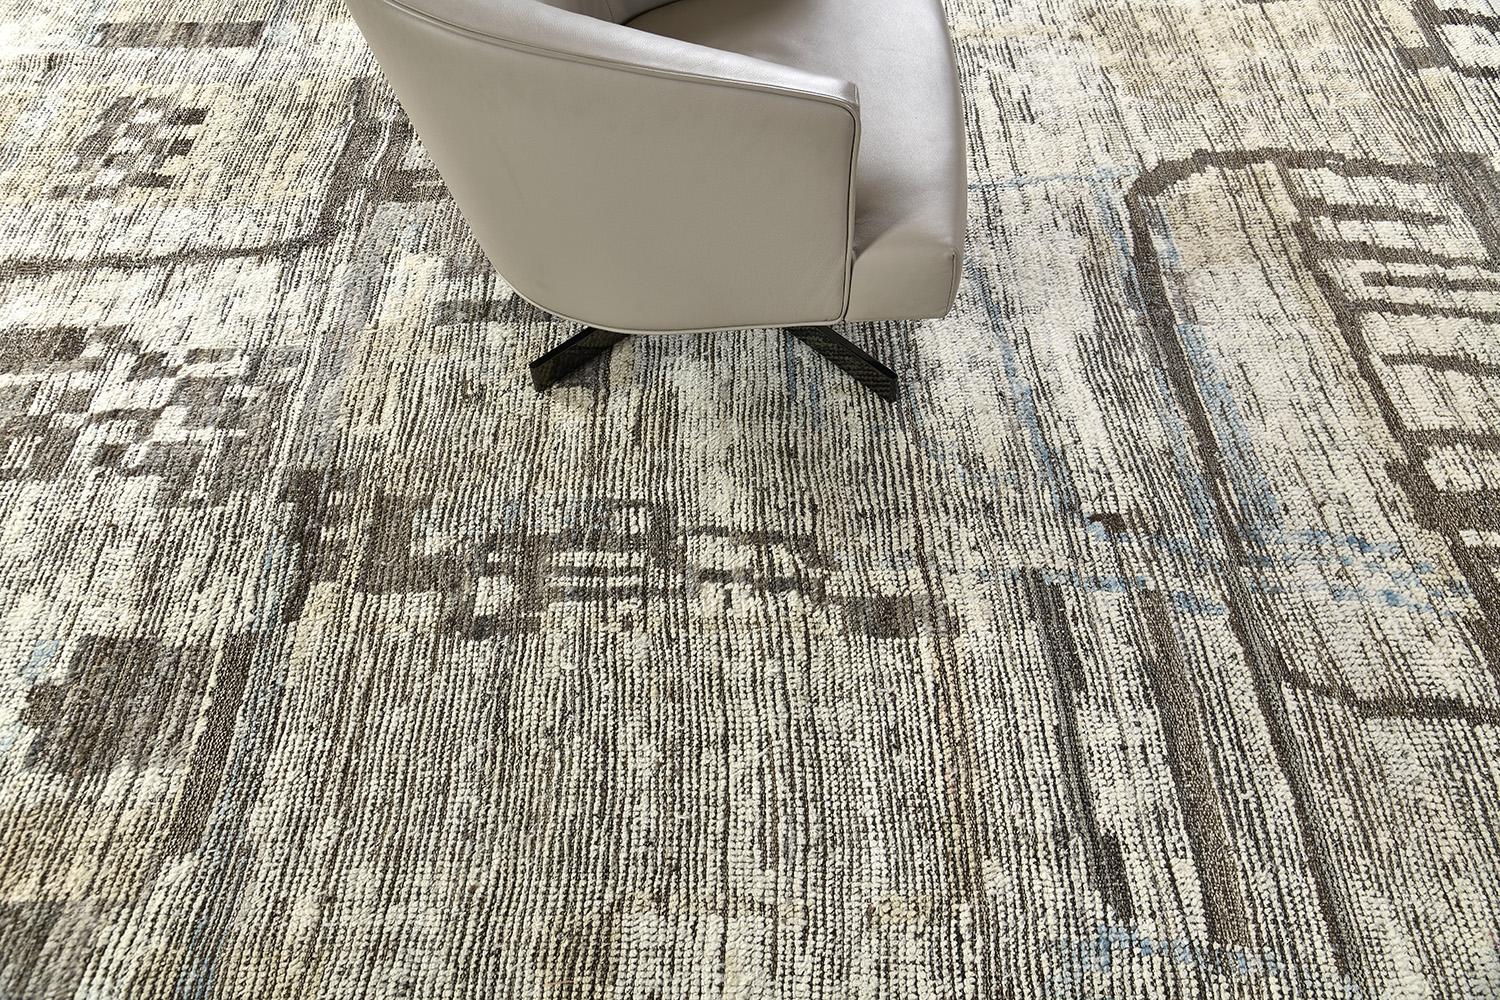 A modern transitional rug called Meliska in Atlas Collection with a gorgeous classic old-world touch. This magnificent rug features impressive ambiguous elements in the soothing earthy tones of cedar and sky blue overlaid in an abrashed ivory field